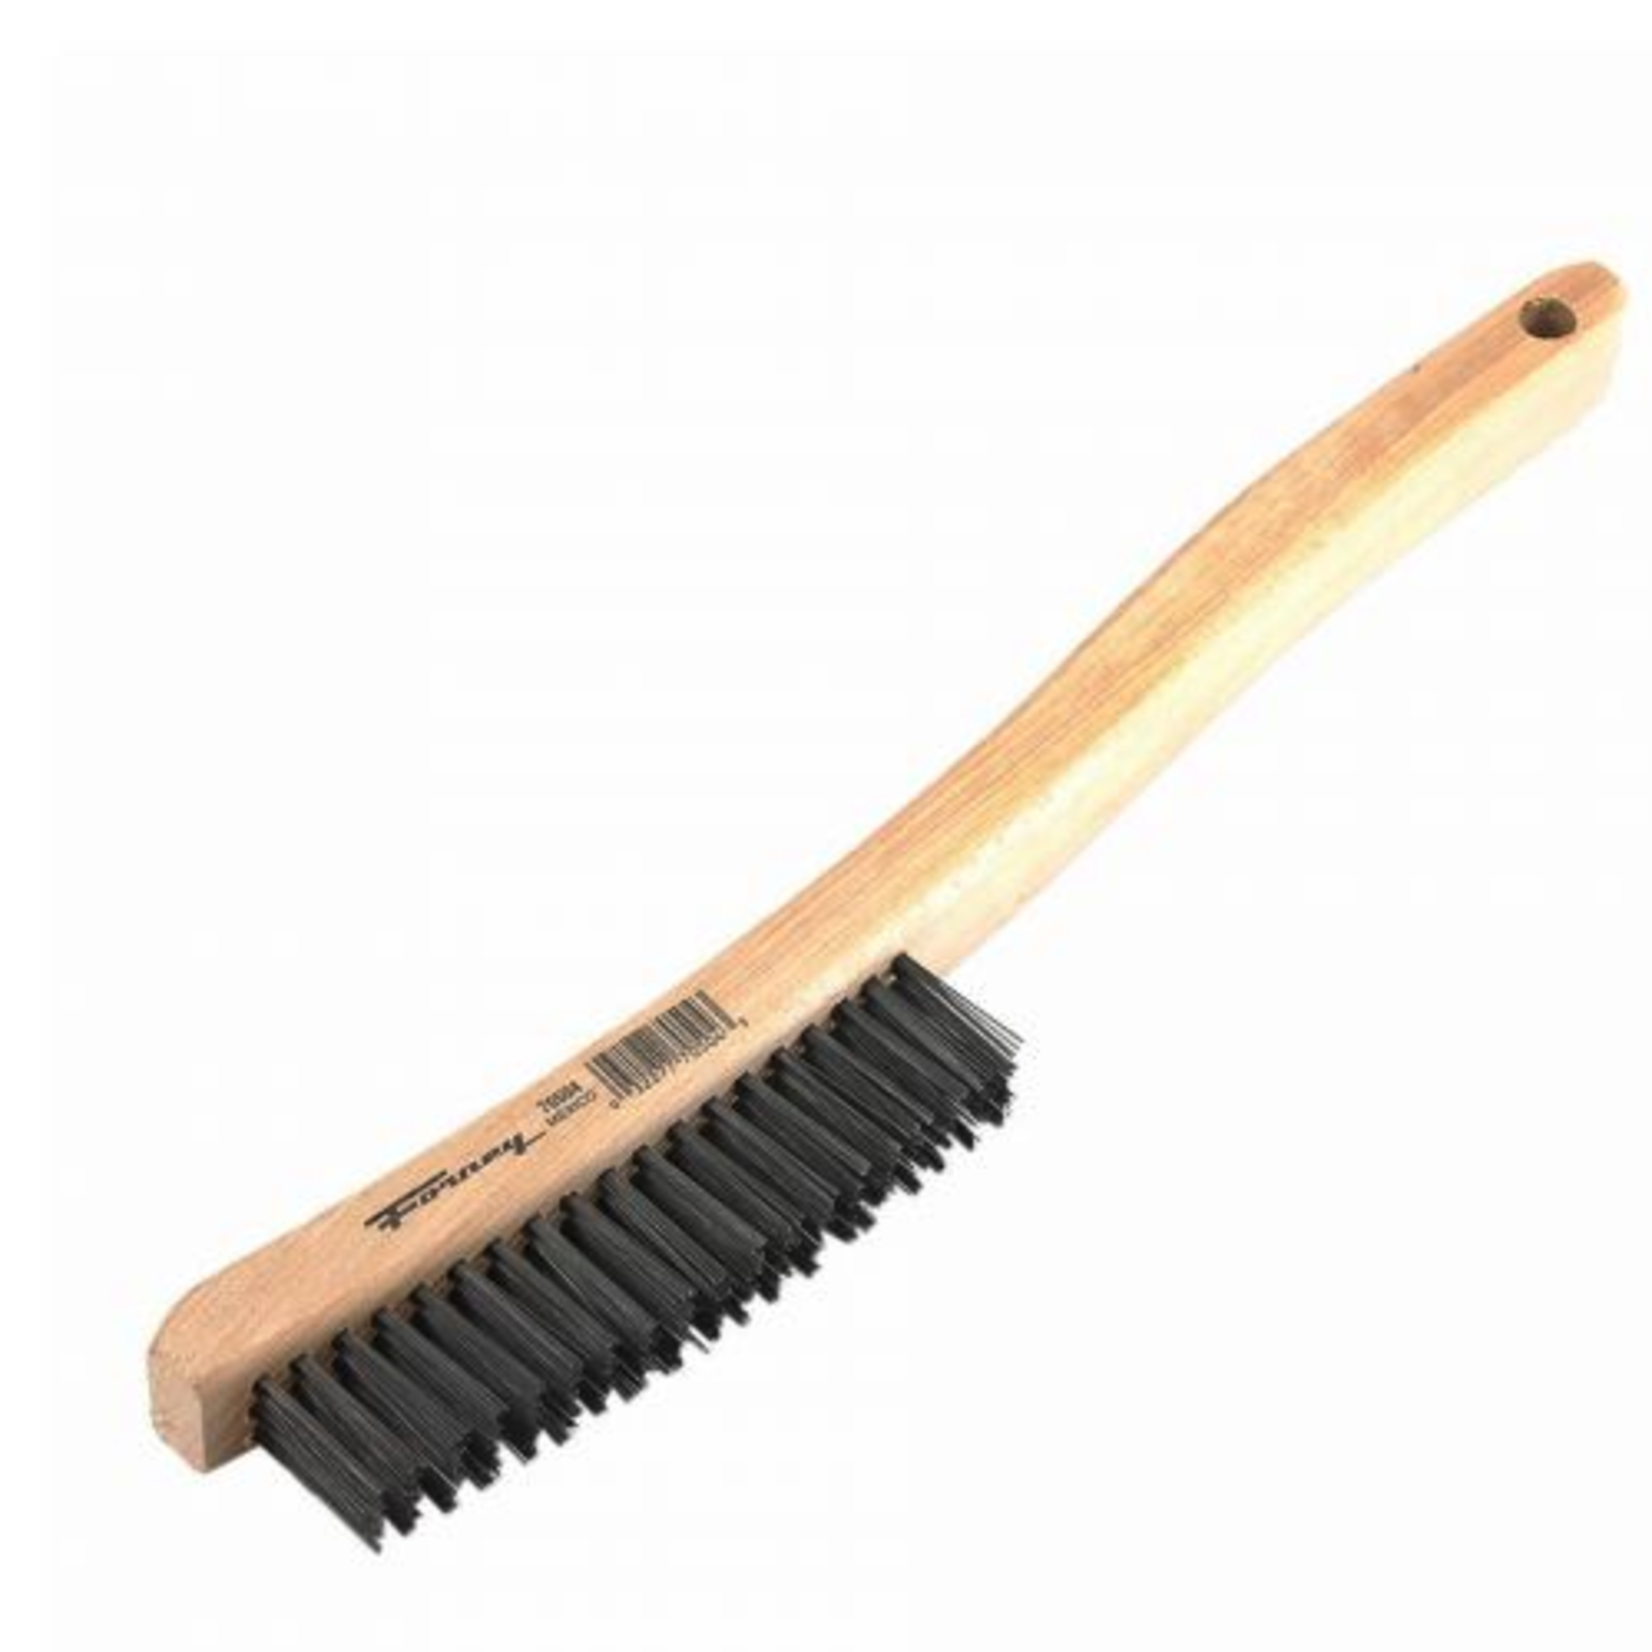 G2S 14" CURVED HANDLE WIRE SCRATCH BRUSH